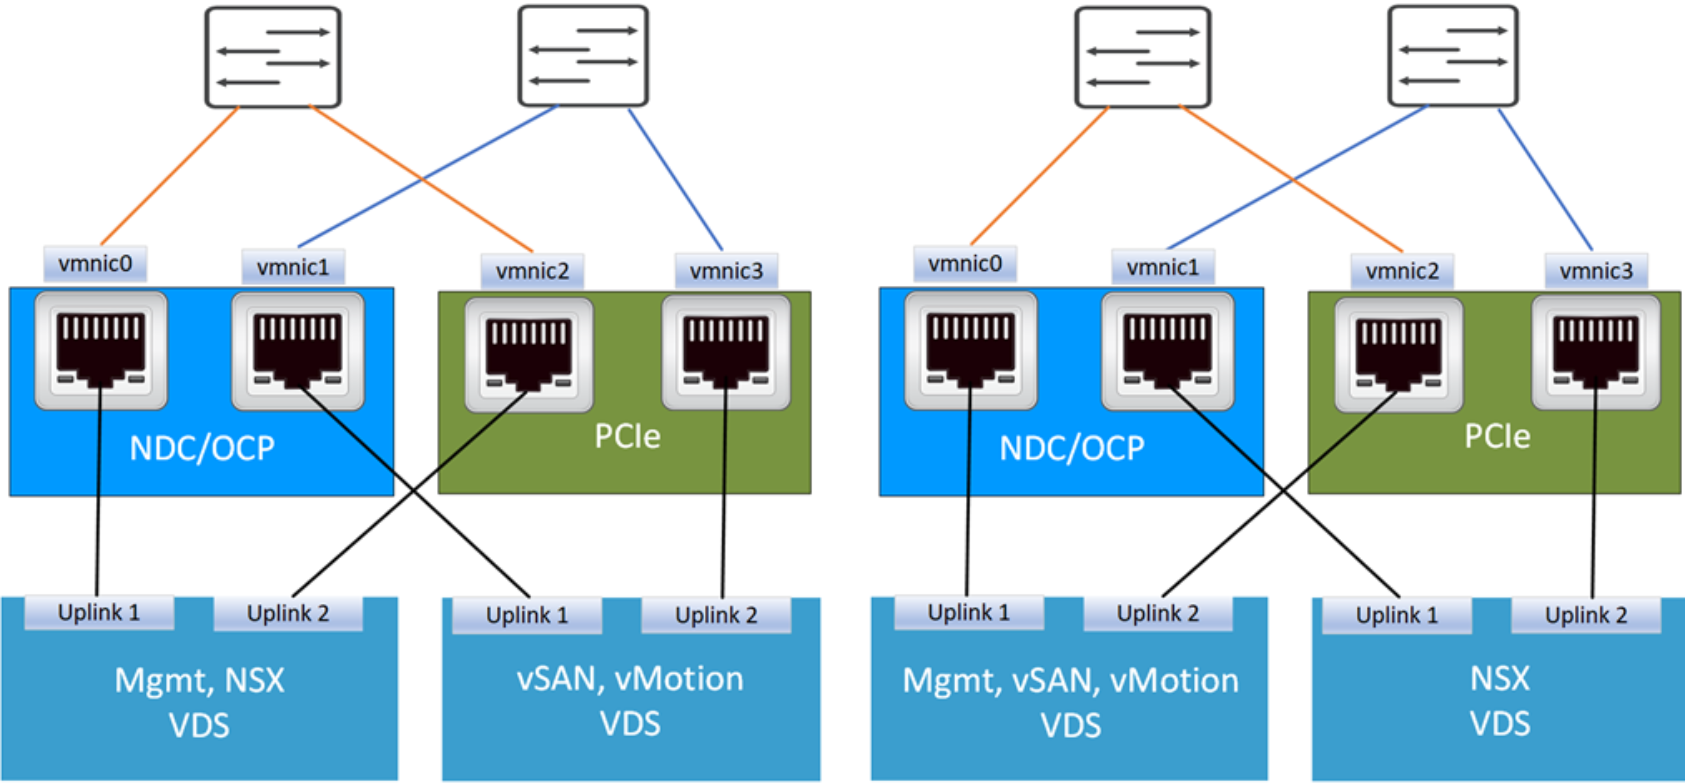 This picture shows connectivity options for VxRail nodes with 4 NICs and two VDSs.